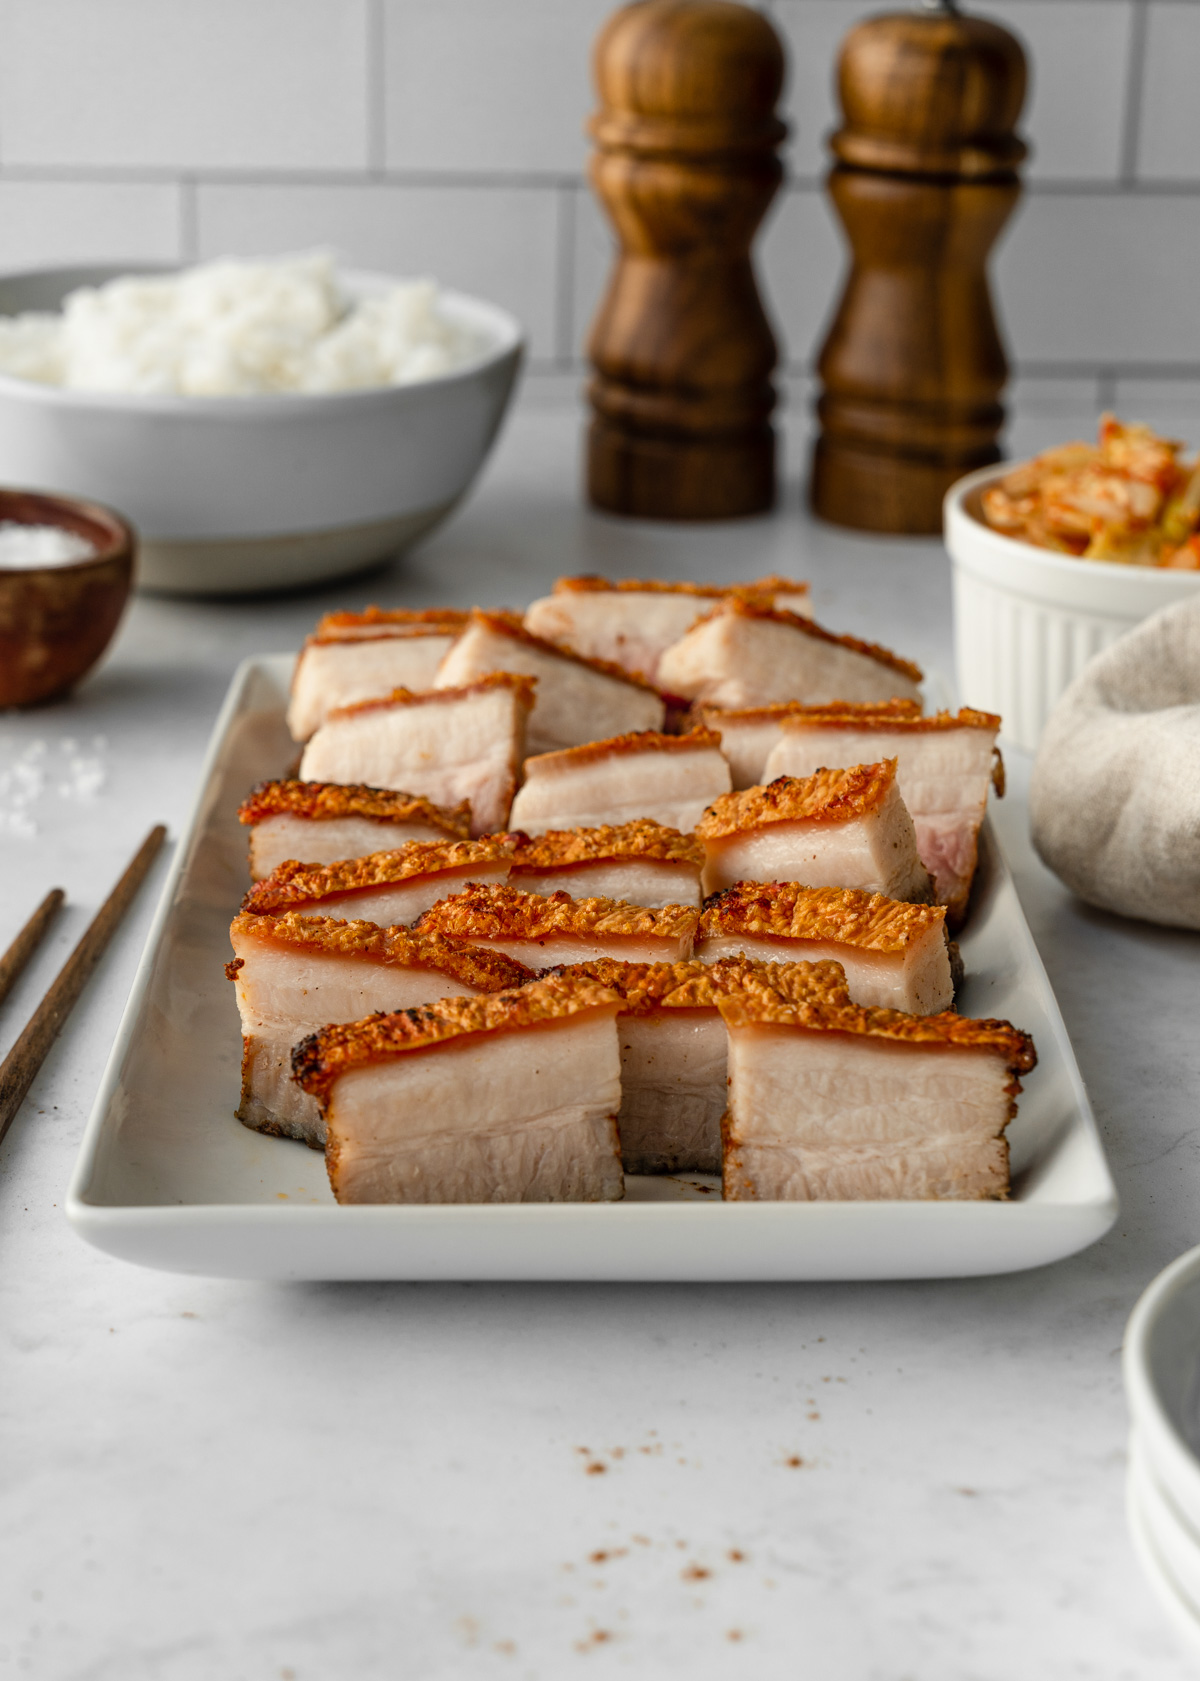 Thin slices of Vietnamese Crispy Pork Belly on a platter with rice, kimchi, chopsticks, salt, and pepper, and a napkin around it.